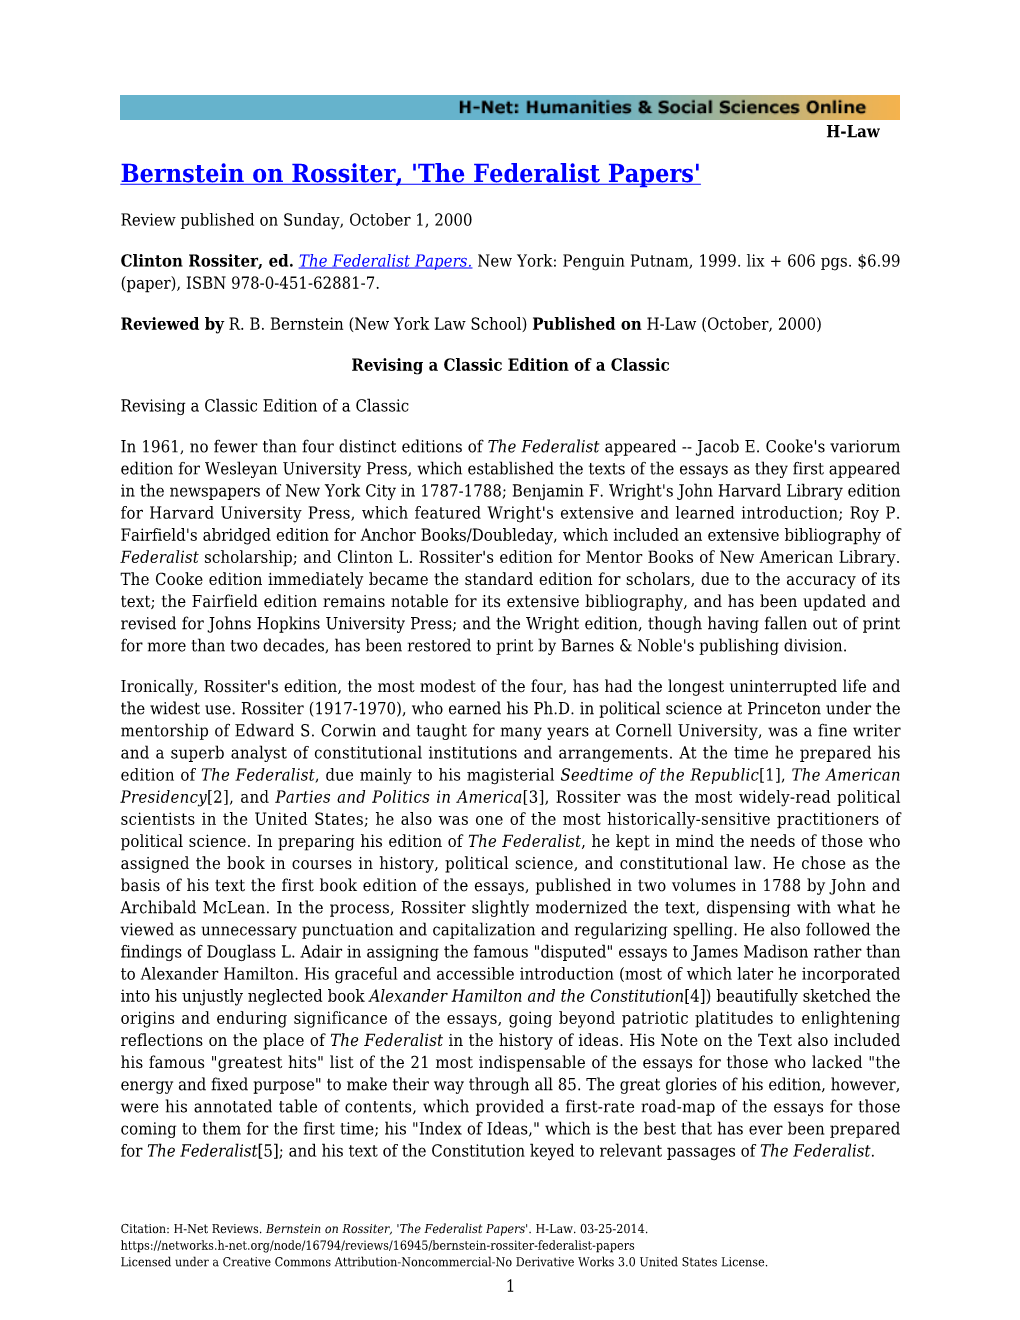 Bernstein on Rossiter, 'The Federalist Papers'